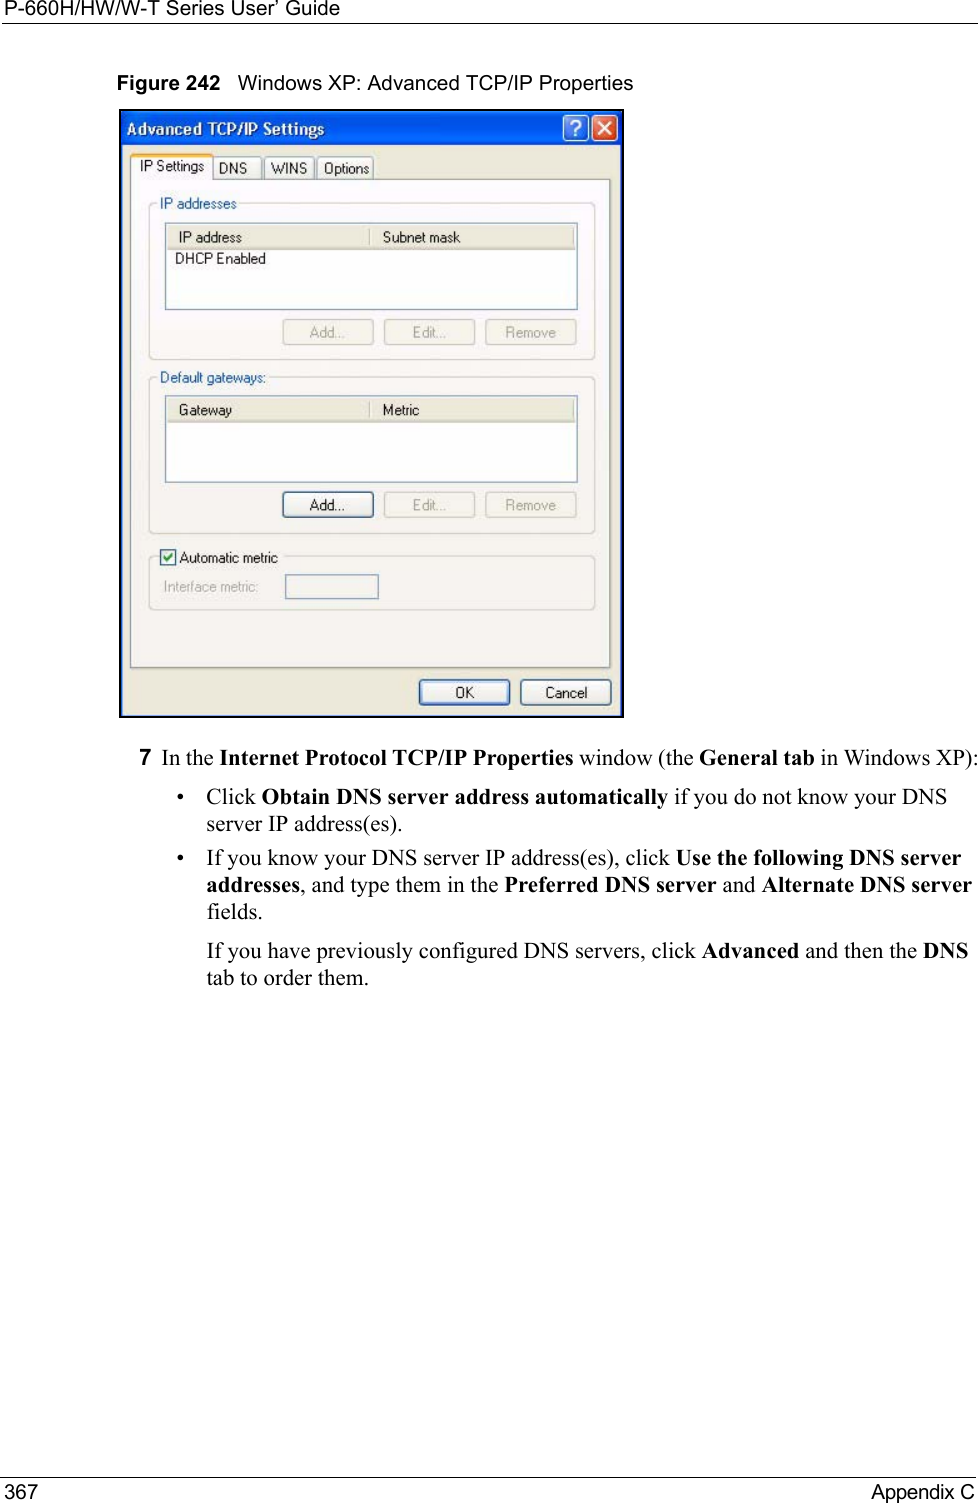 P-660H/HW/W-T Series User’ Guide367 Appendix CFigure 242   Windows XP: Advanced TCP/IP Properties7In the Internet Protocol TCP/IP Properties window (the General tab in Windows XP):• Click Obtain DNS server address automatically if you do not know your DNS server IP address(es).• If you know your DNS server IP address(es), click Use the following DNS server addresses, and type them in the Preferred DNS server and Alternate DNS server fields. If you have previously configured DNS servers, click Advanced and then the DNS tab to order them.